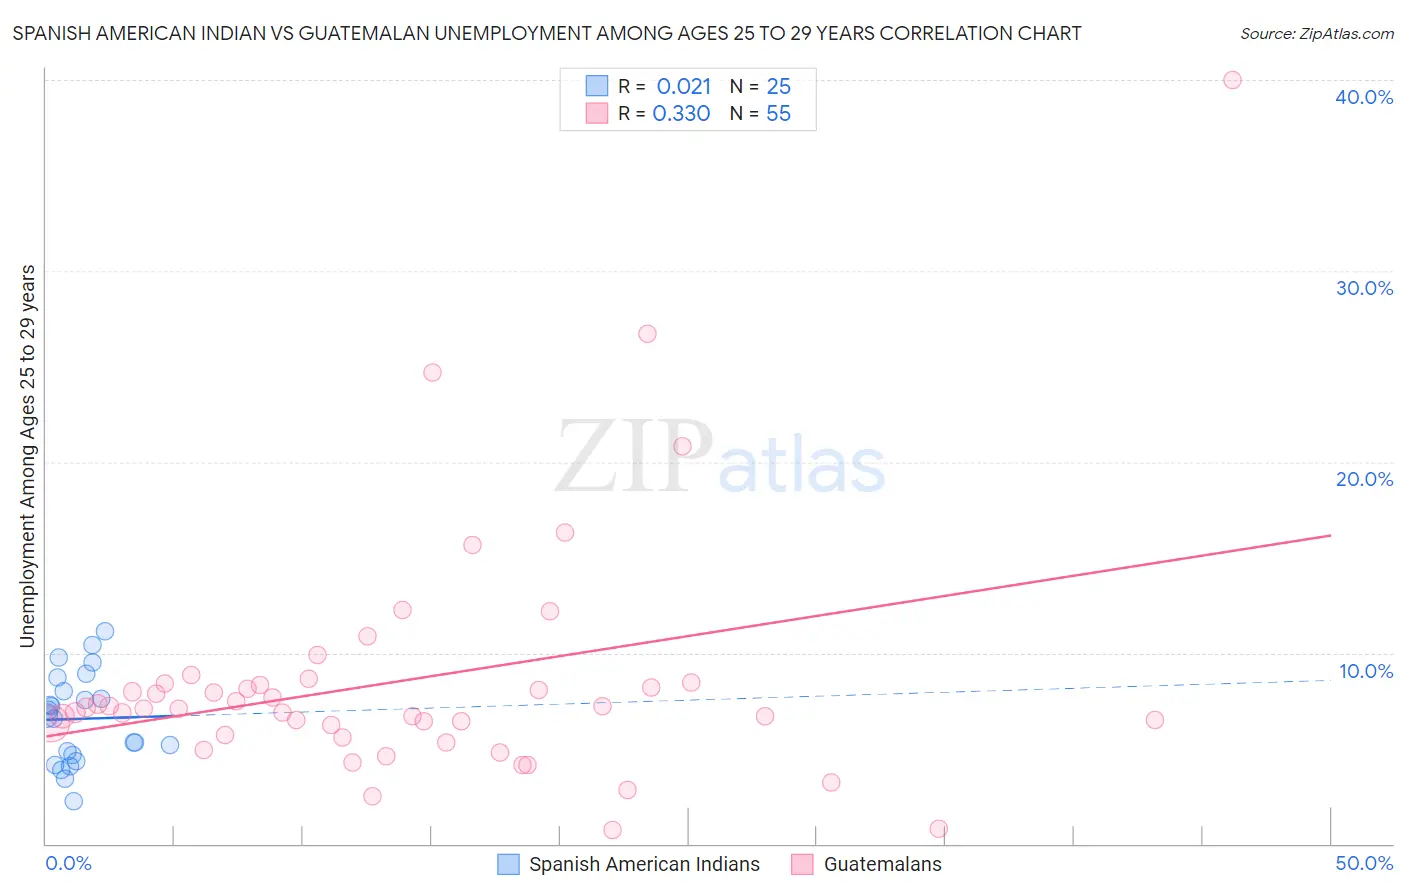 Spanish American Indian vs Guatemalan Unemployment Among Ages 25 to 29 years